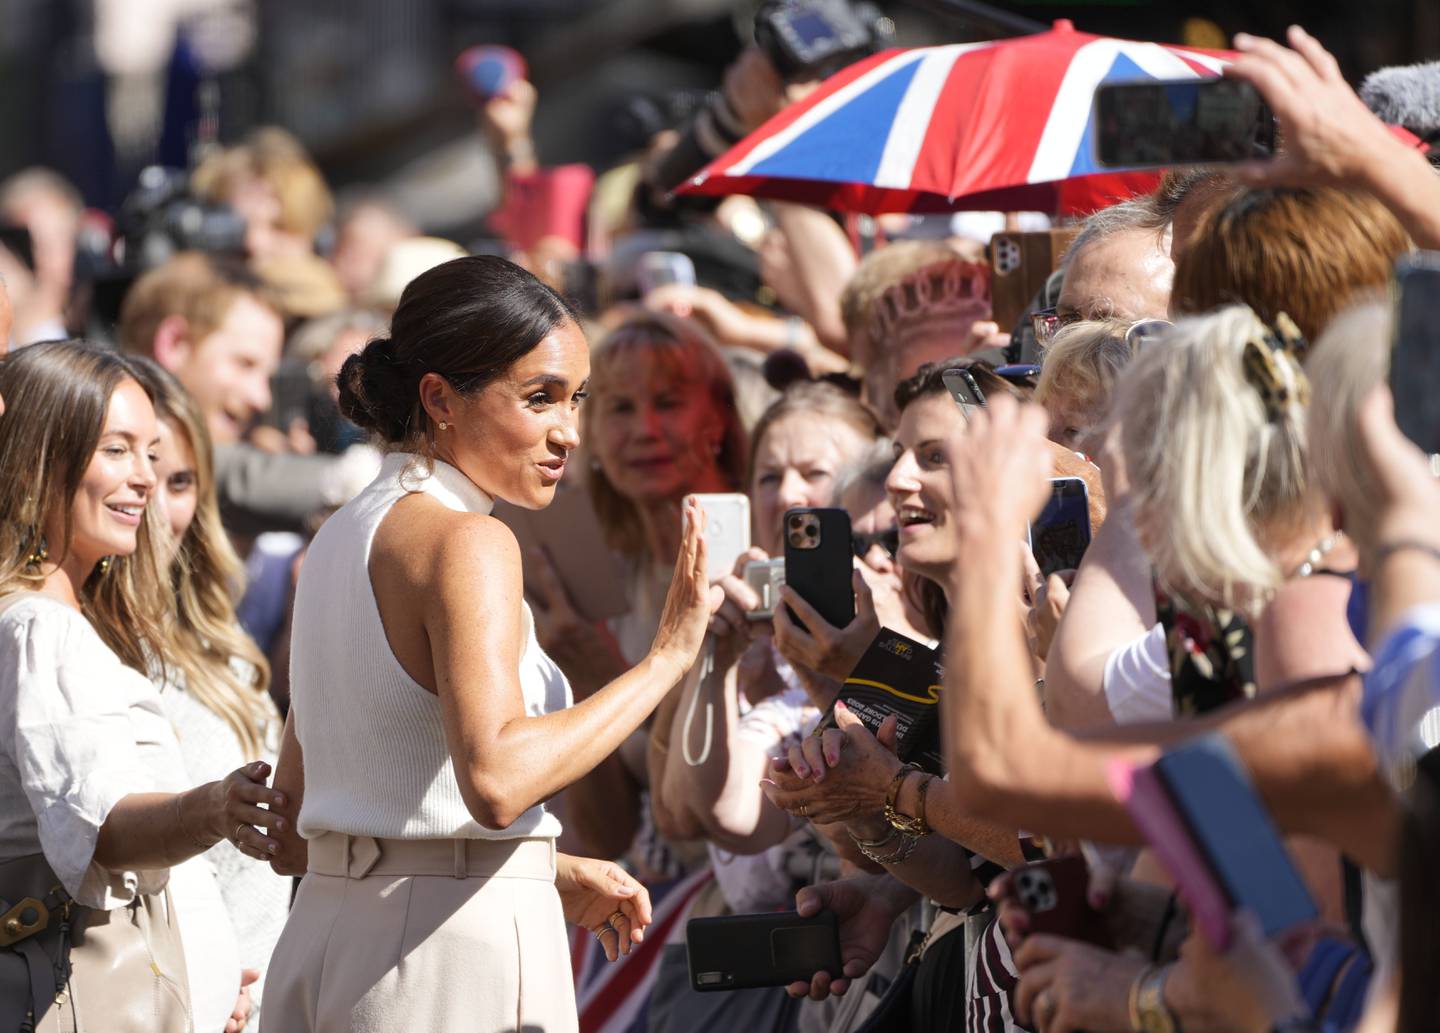 Meghan, Duchess of Sussex, meets fans after a visit to the town hall in Dusseldorf. AP